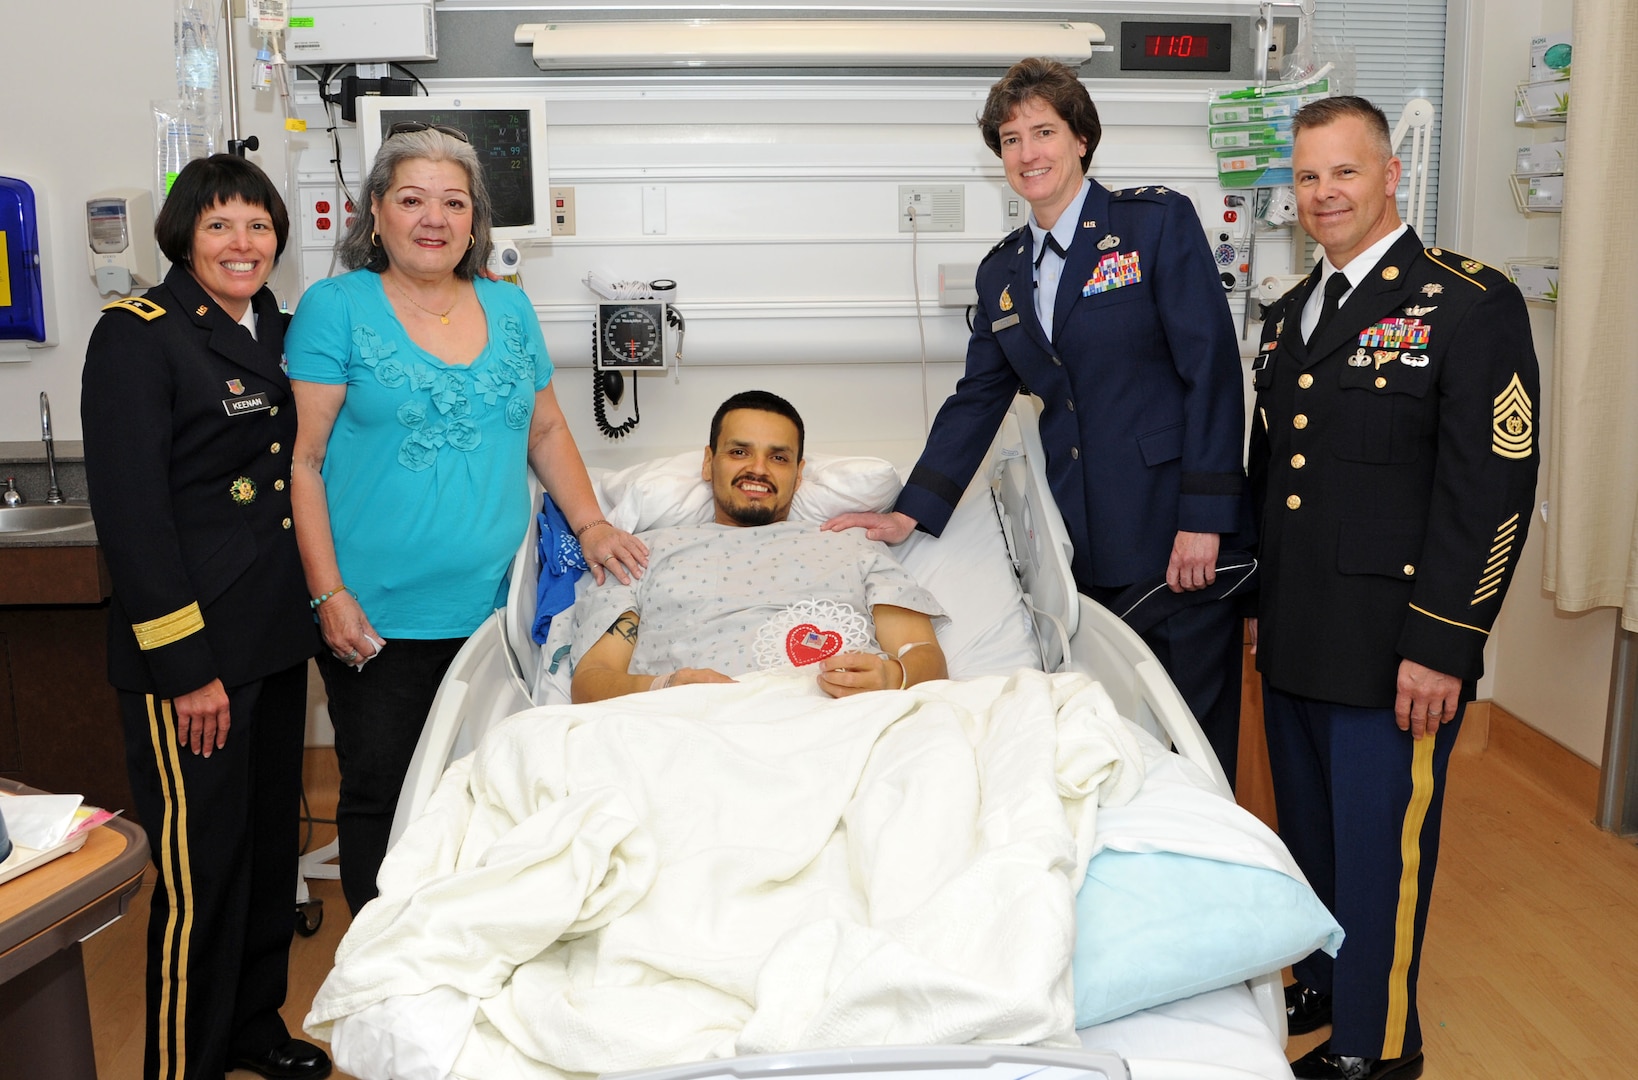 (From left to right) Army Maj. Gen. Jimmie Keenan, Southern Regional Medical Command commander,Olga Alcoser, mother of Army veteran Maximiliano Martinez, Maximiliano M. Martinez, Army veteran, Air Force Maj. Gen. Peggy Poore, Air Force Personnel Center commander and Army Command Sgt. Maj. Jayme D. Johnson, Southern Regional Medical Command command sergeant major, pose for a photo during the 2014 National Salute to Veteran Patients Feb. 14 at the Audie Murphy VA Hospital in San Antonio. The Joint Base San Antonio military ambassadors and JBSA military leaders were on hand to distribute valentines and visit with veteran patients. Veterans administration facilities across the United States pay tribute to veteran patients annually during this week-long salute. (U.S. Air Force photo by Melissa Peterson)